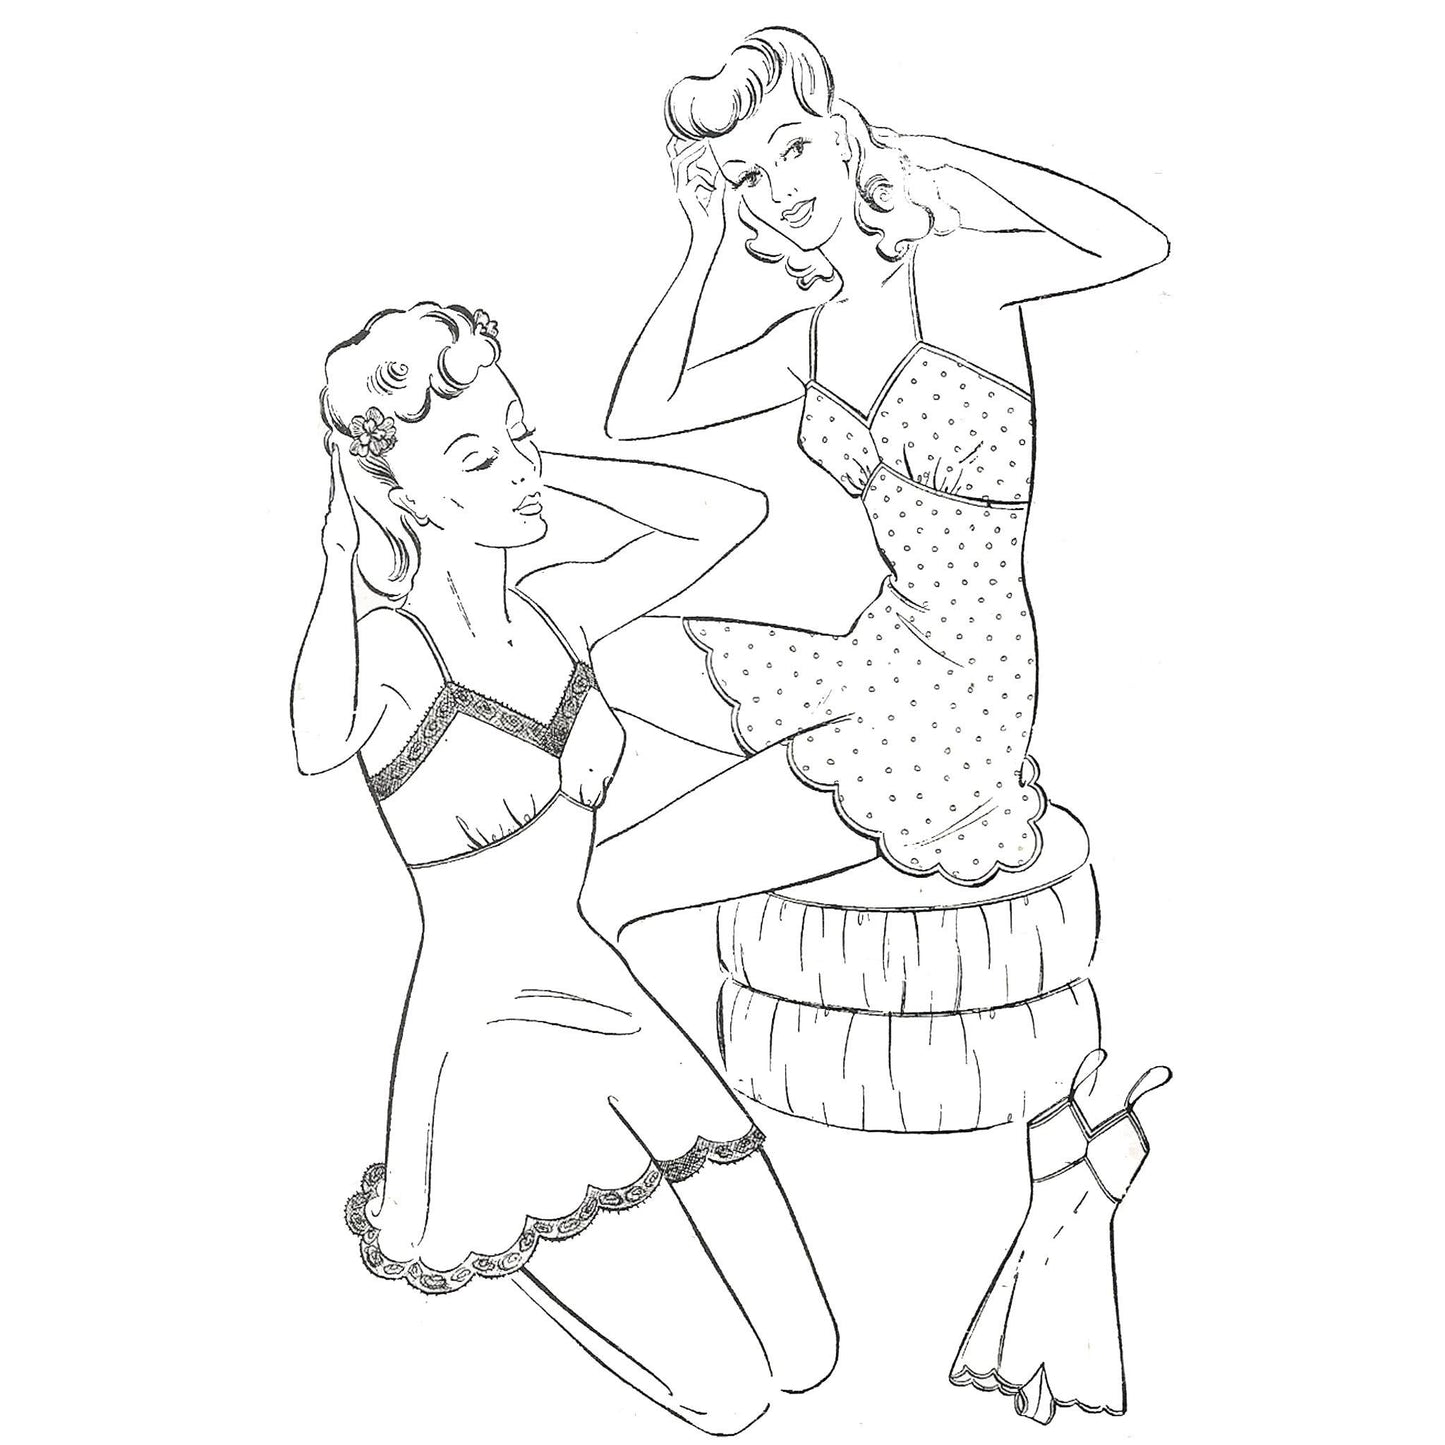 Outline drawing of 1940s lingerie made from Style 4643 pattern